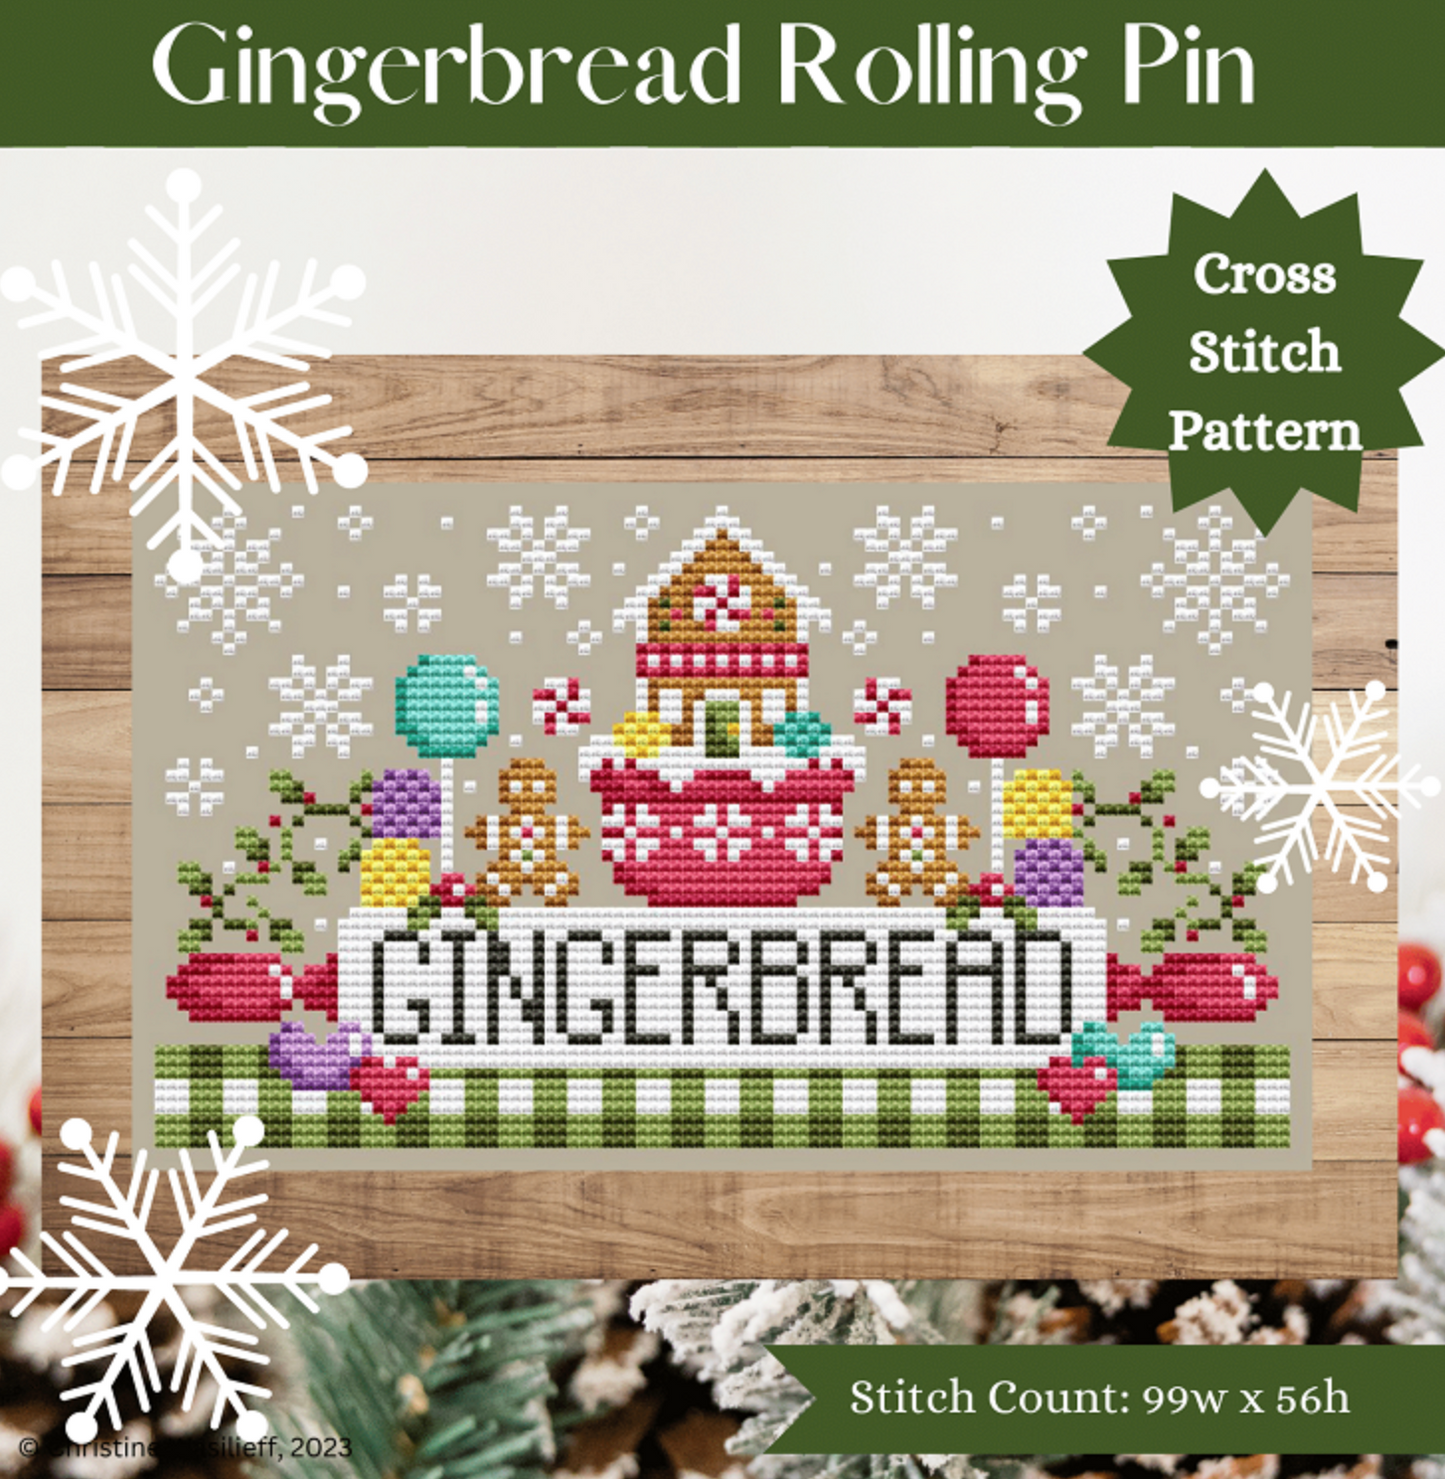 Gingerbread Rolling Pin